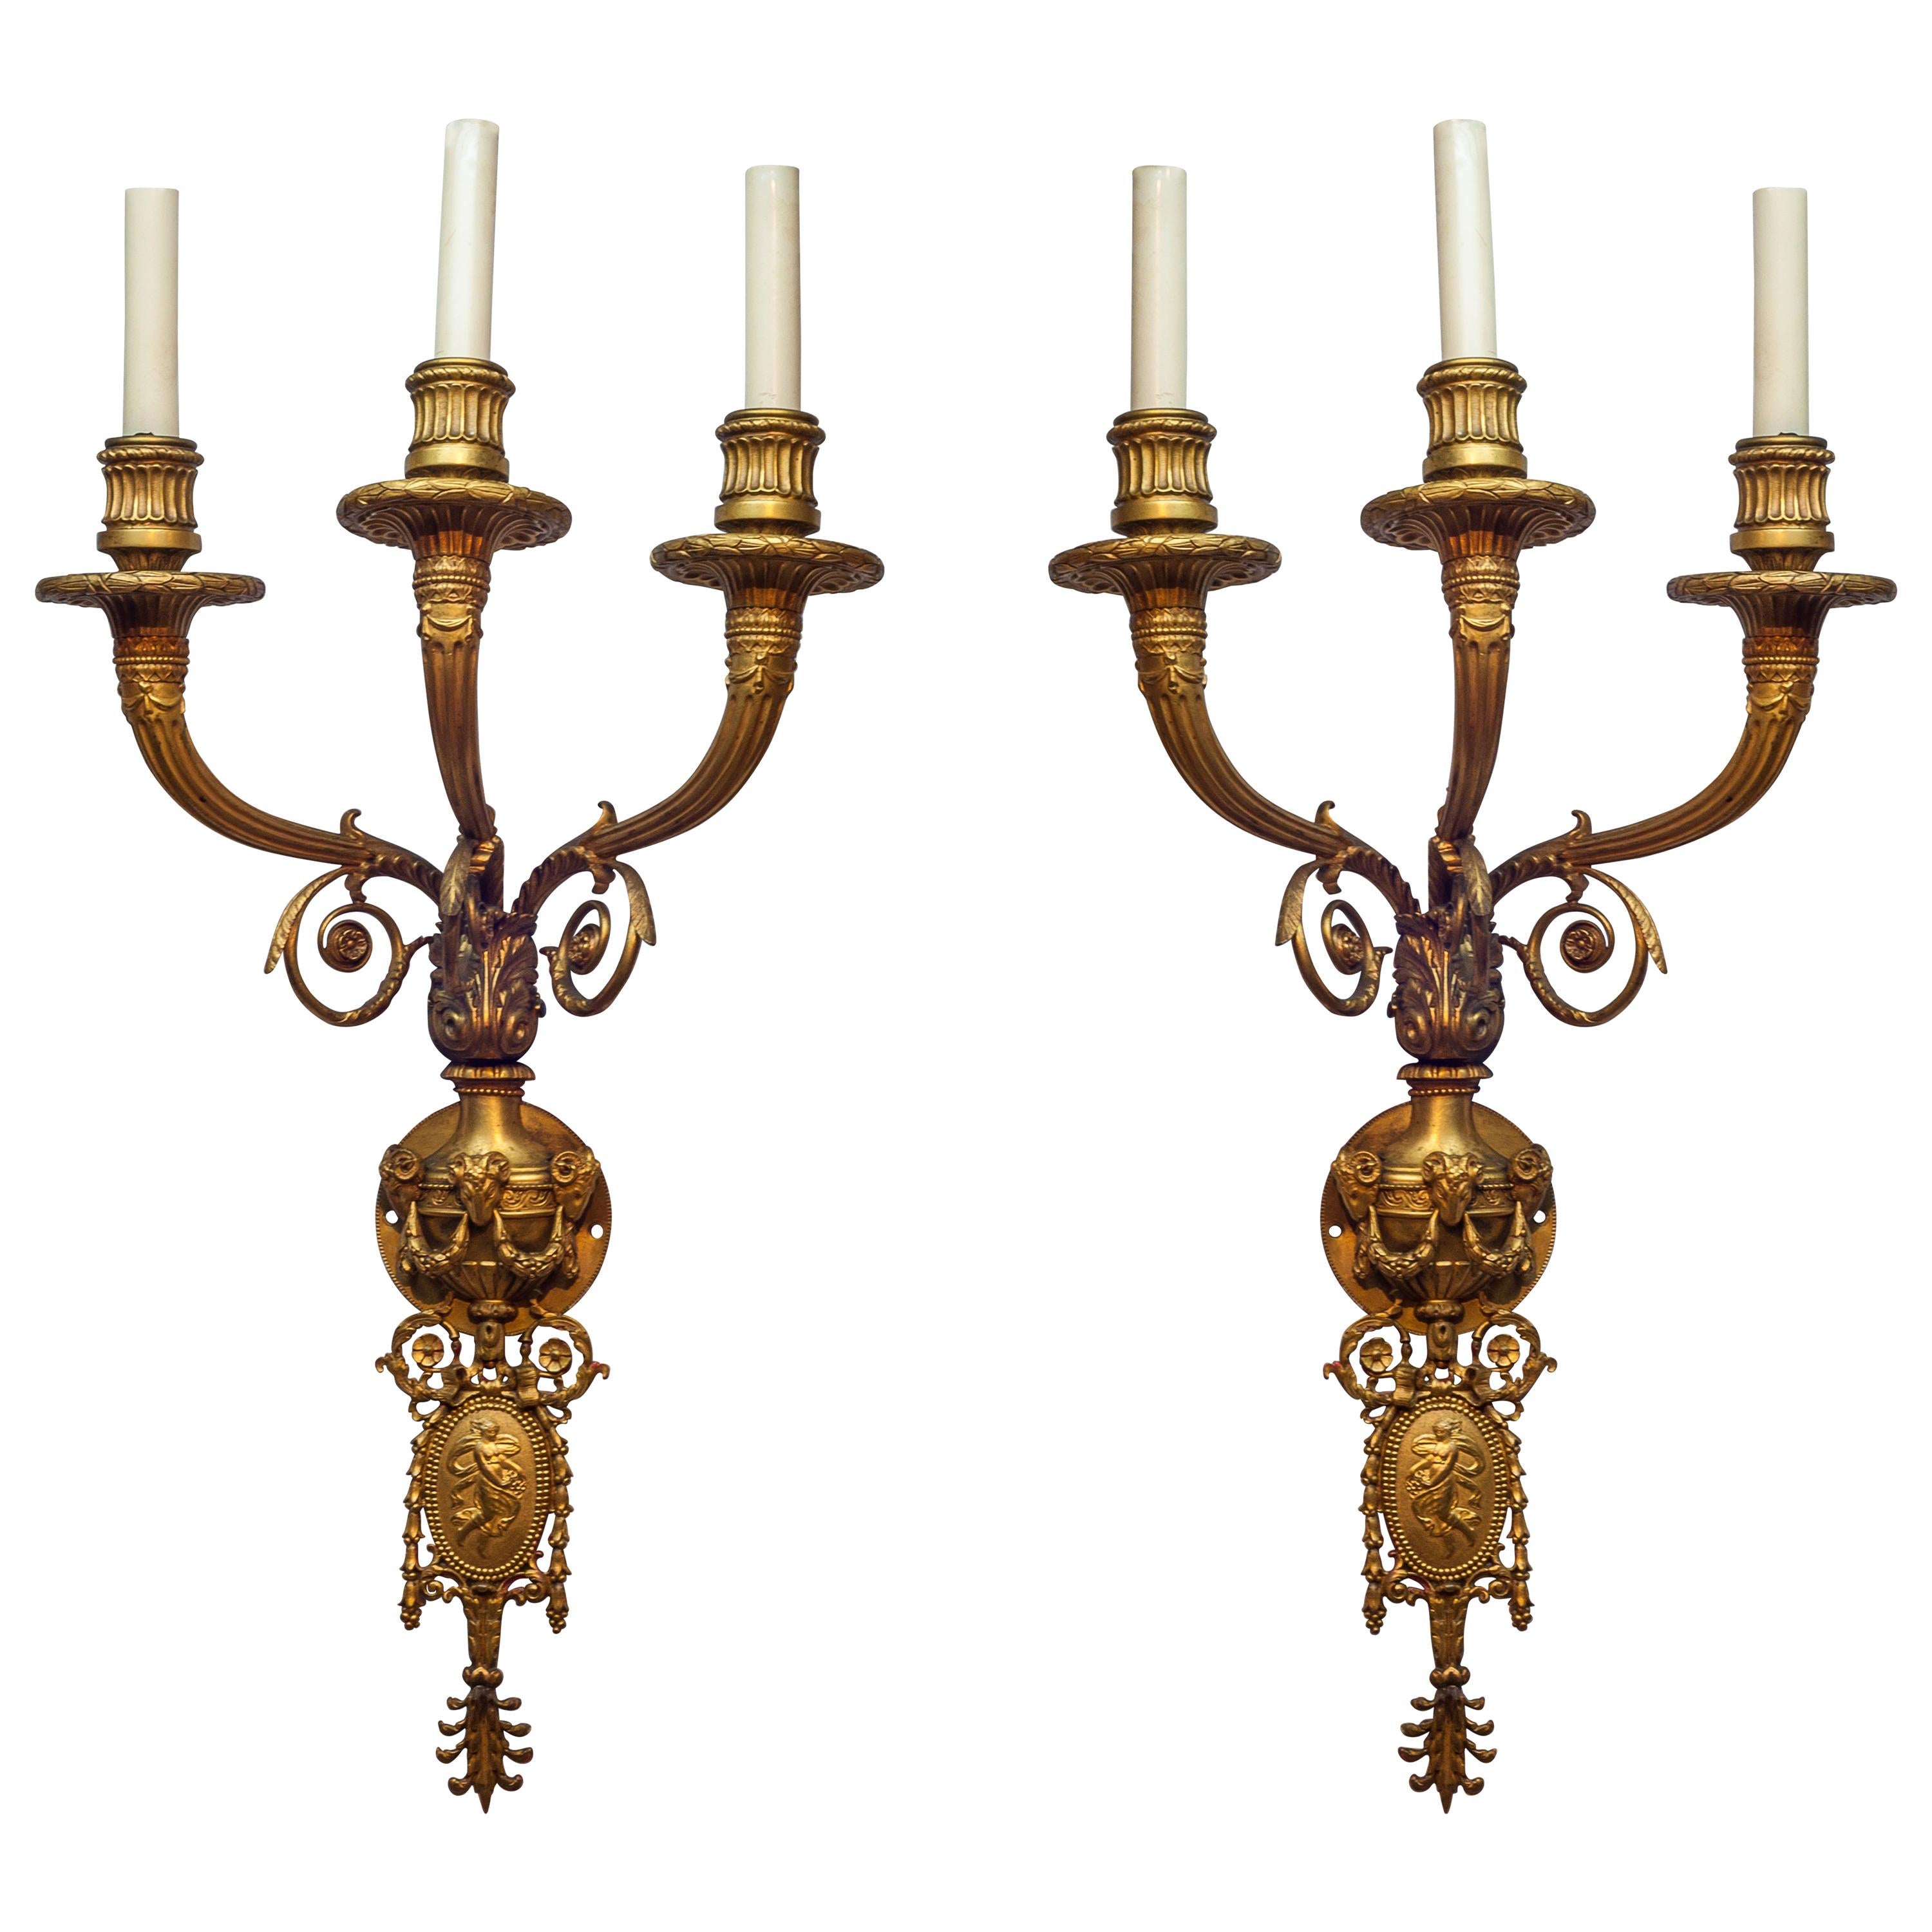 Pair of Three-Arm Gilt Bronze Wall Sconces Attributed to Caldwell